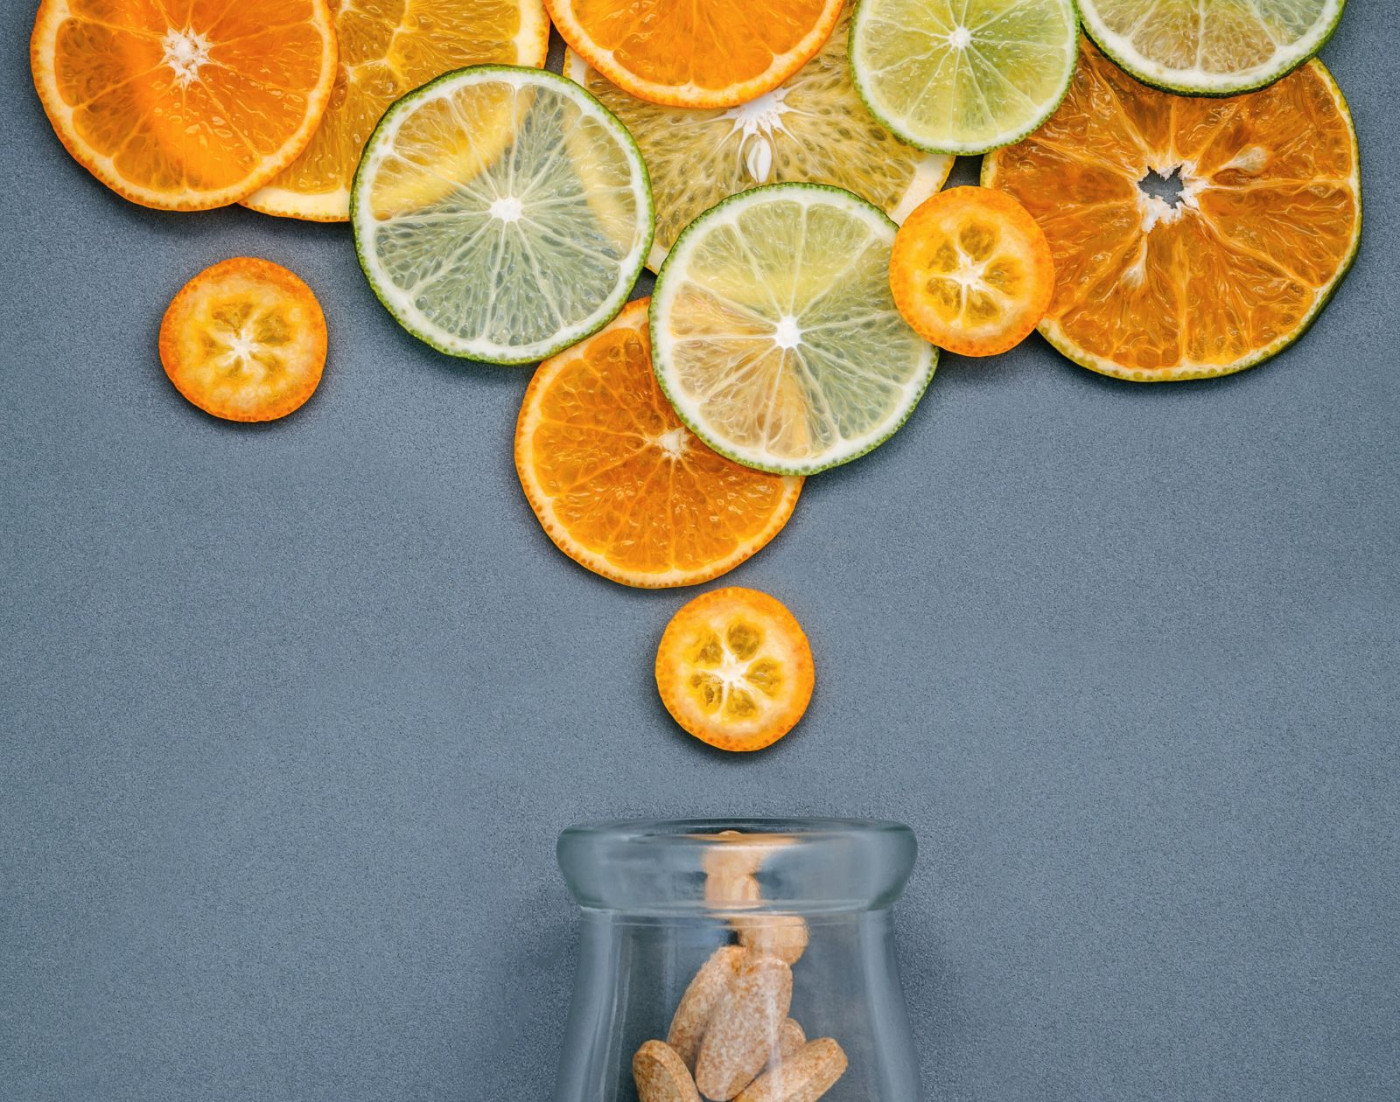 Citrus fruits above a bottle of vitamins | Vitamin Supplements in cold weather article 